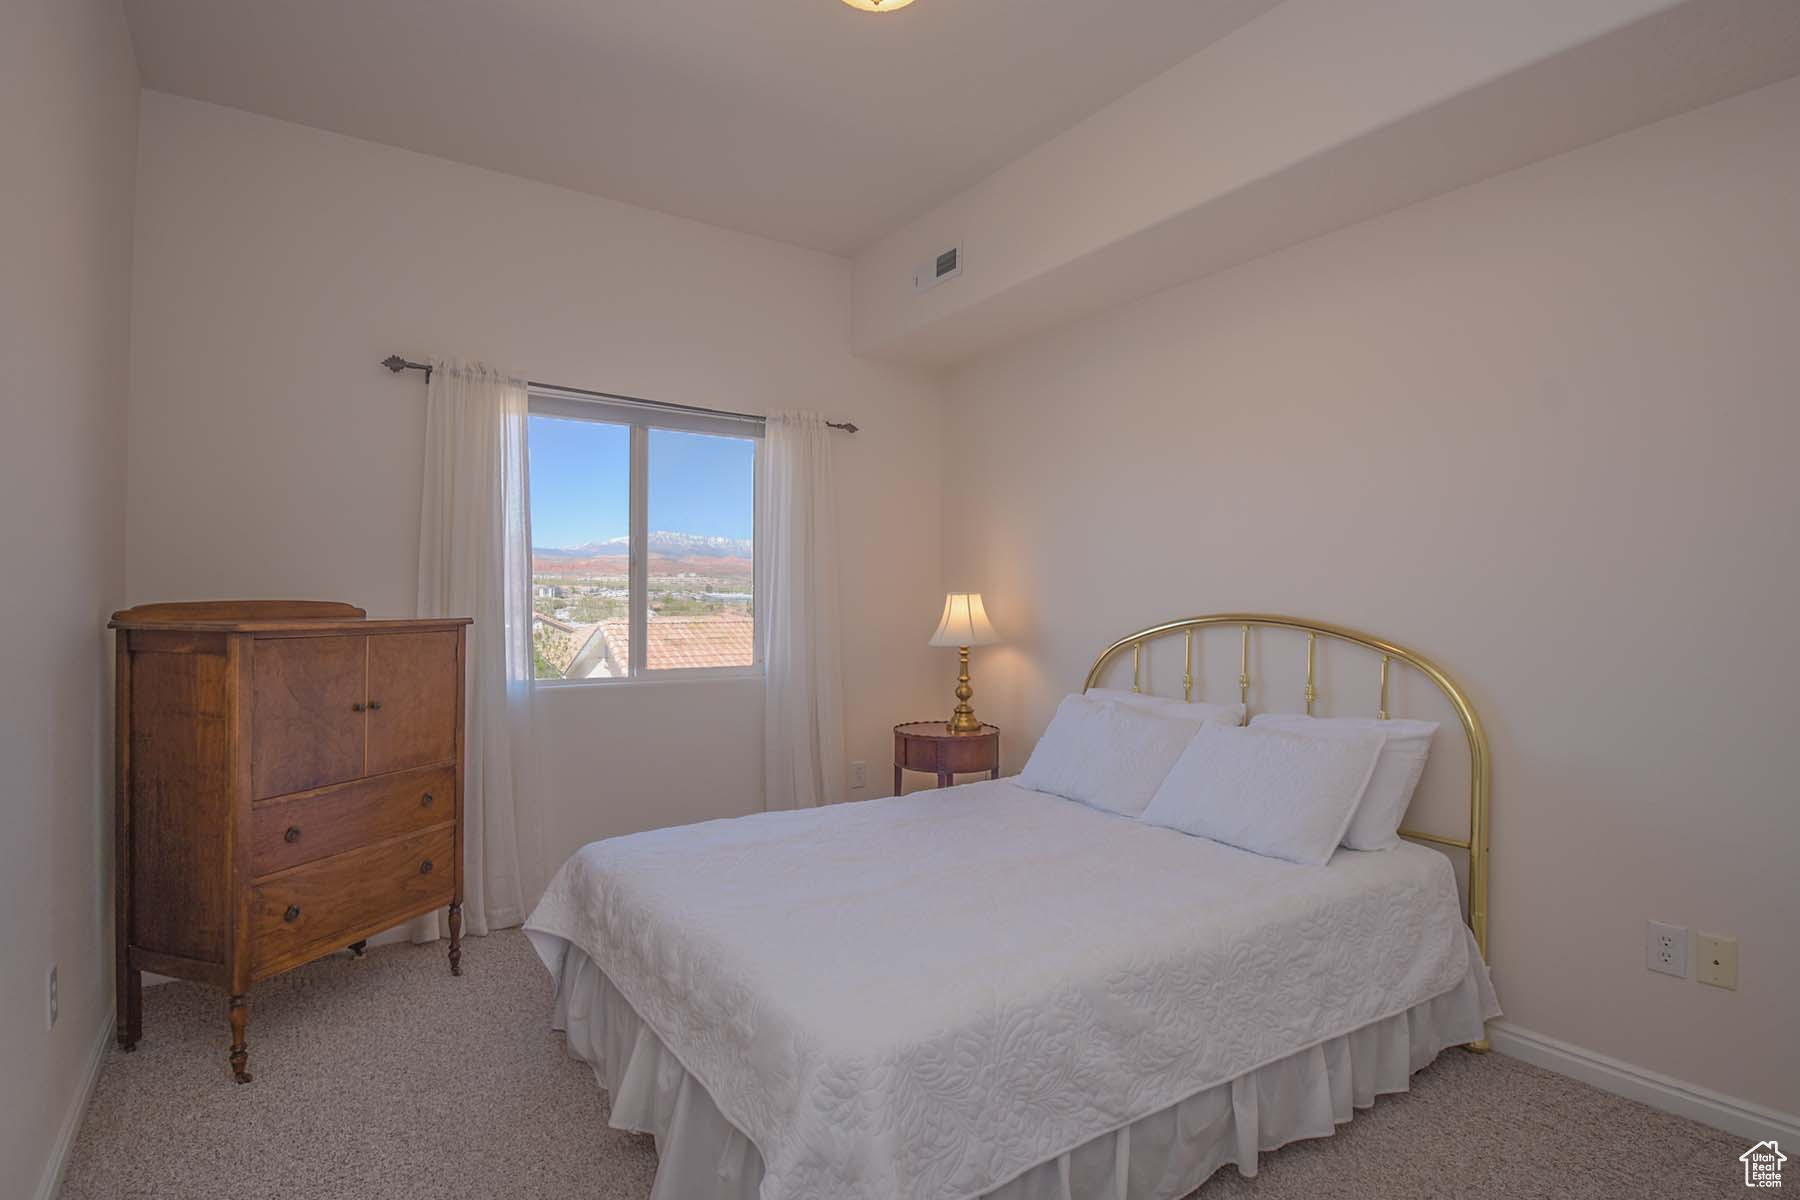 Guest bedroom with view of Pine Valley Mountain